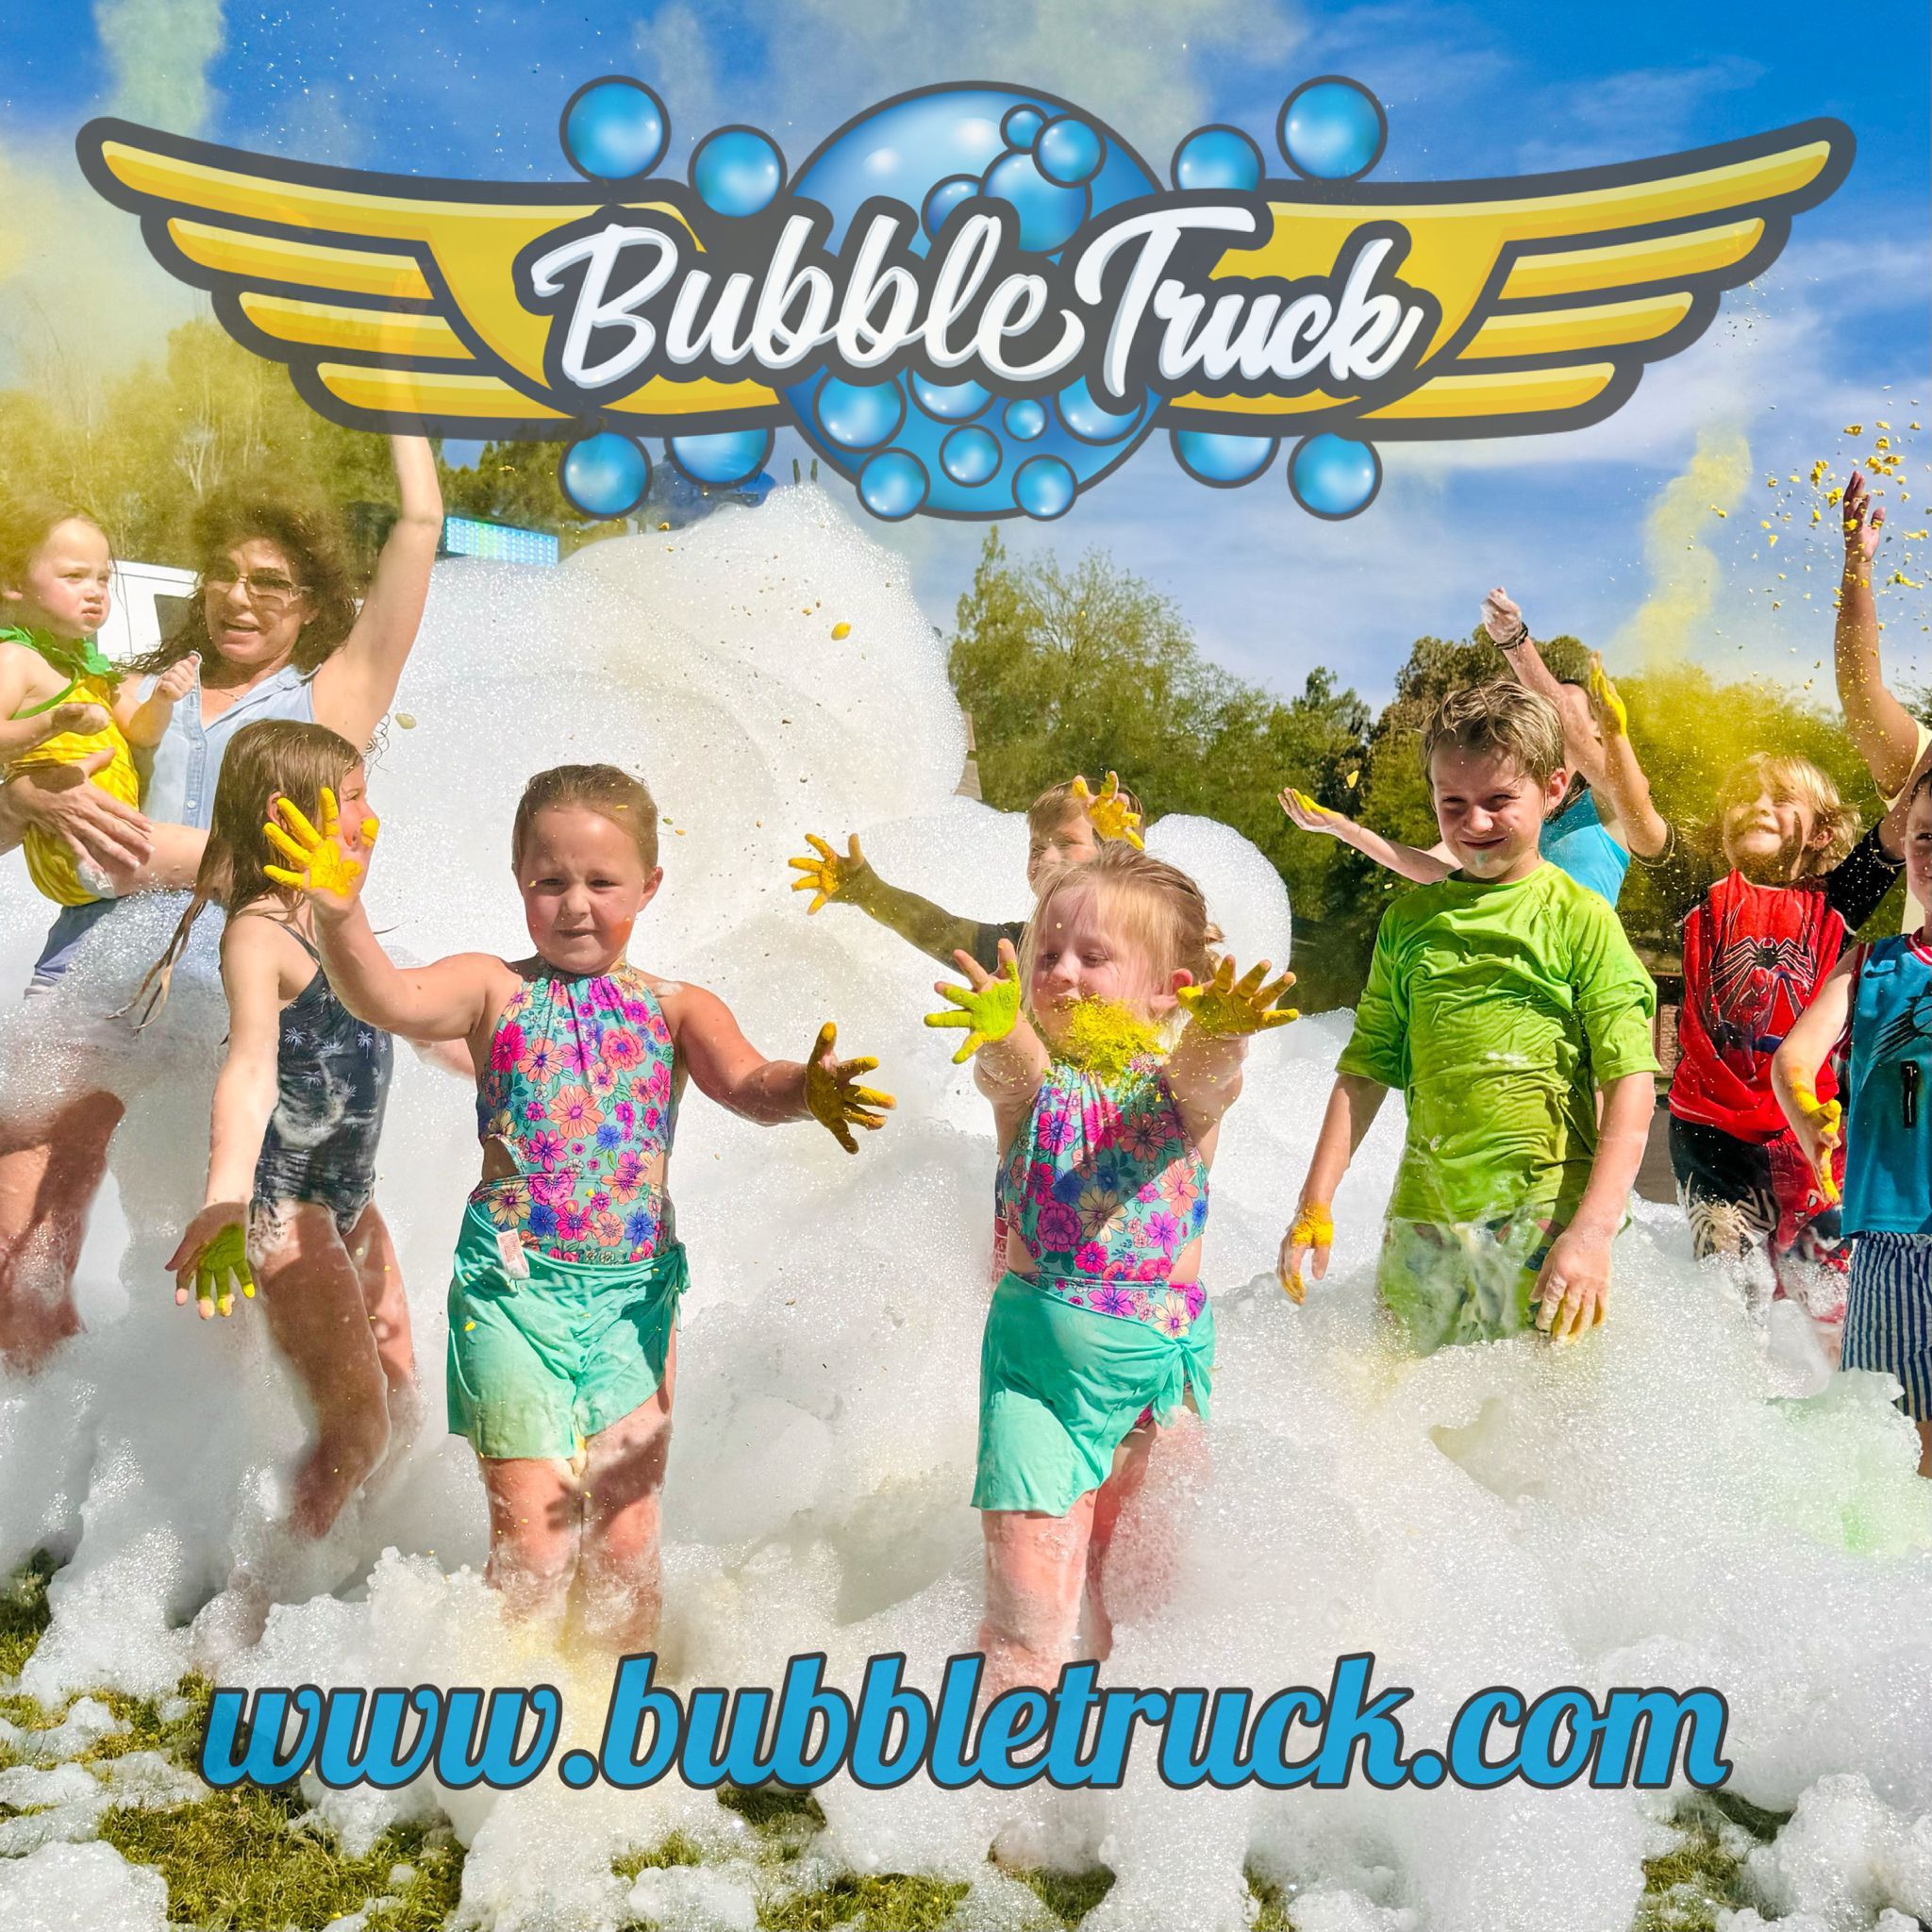 Bubble Foam Parties For Summer Birthdays, Camps, And School Events!